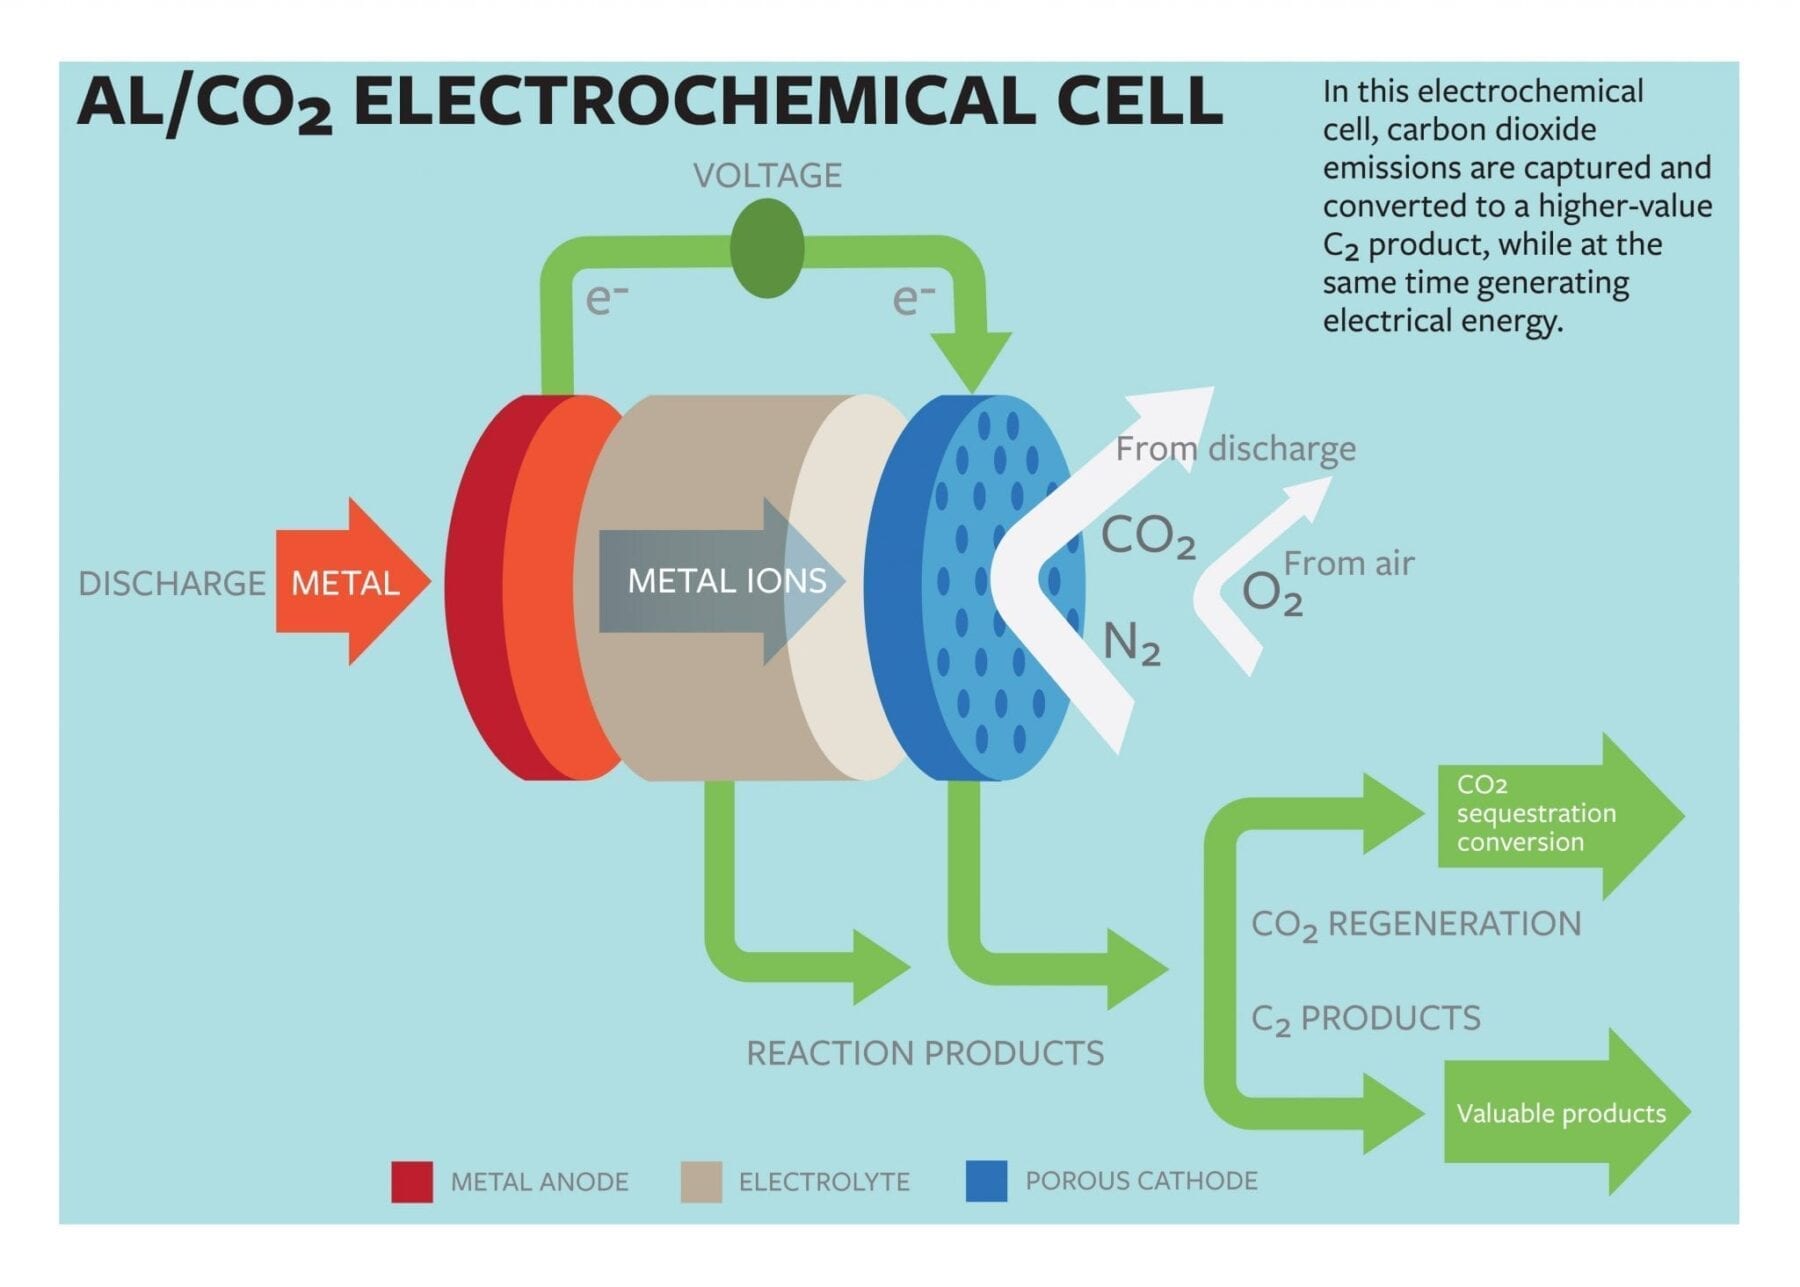 Cornell scientists convert carbon dioxide to useful products and create electricity